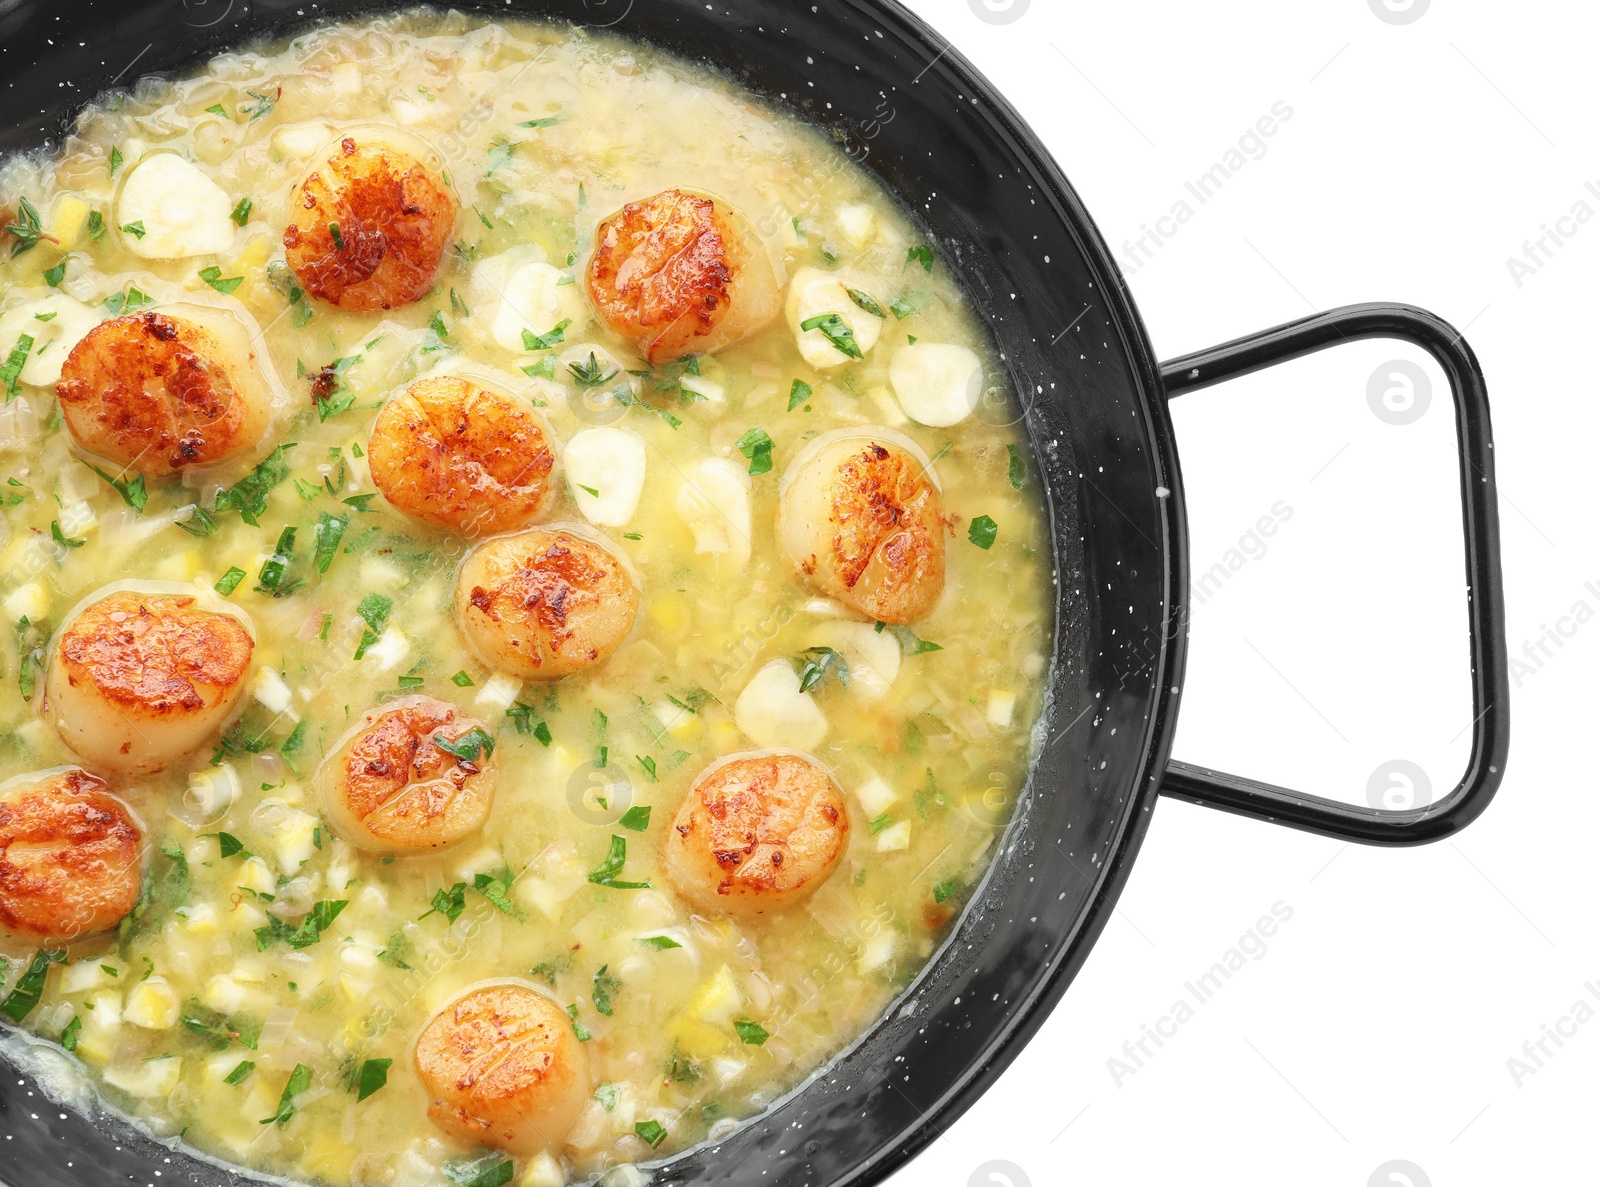 Photo of Fried scallops with sauce in dish isolated on white, top view